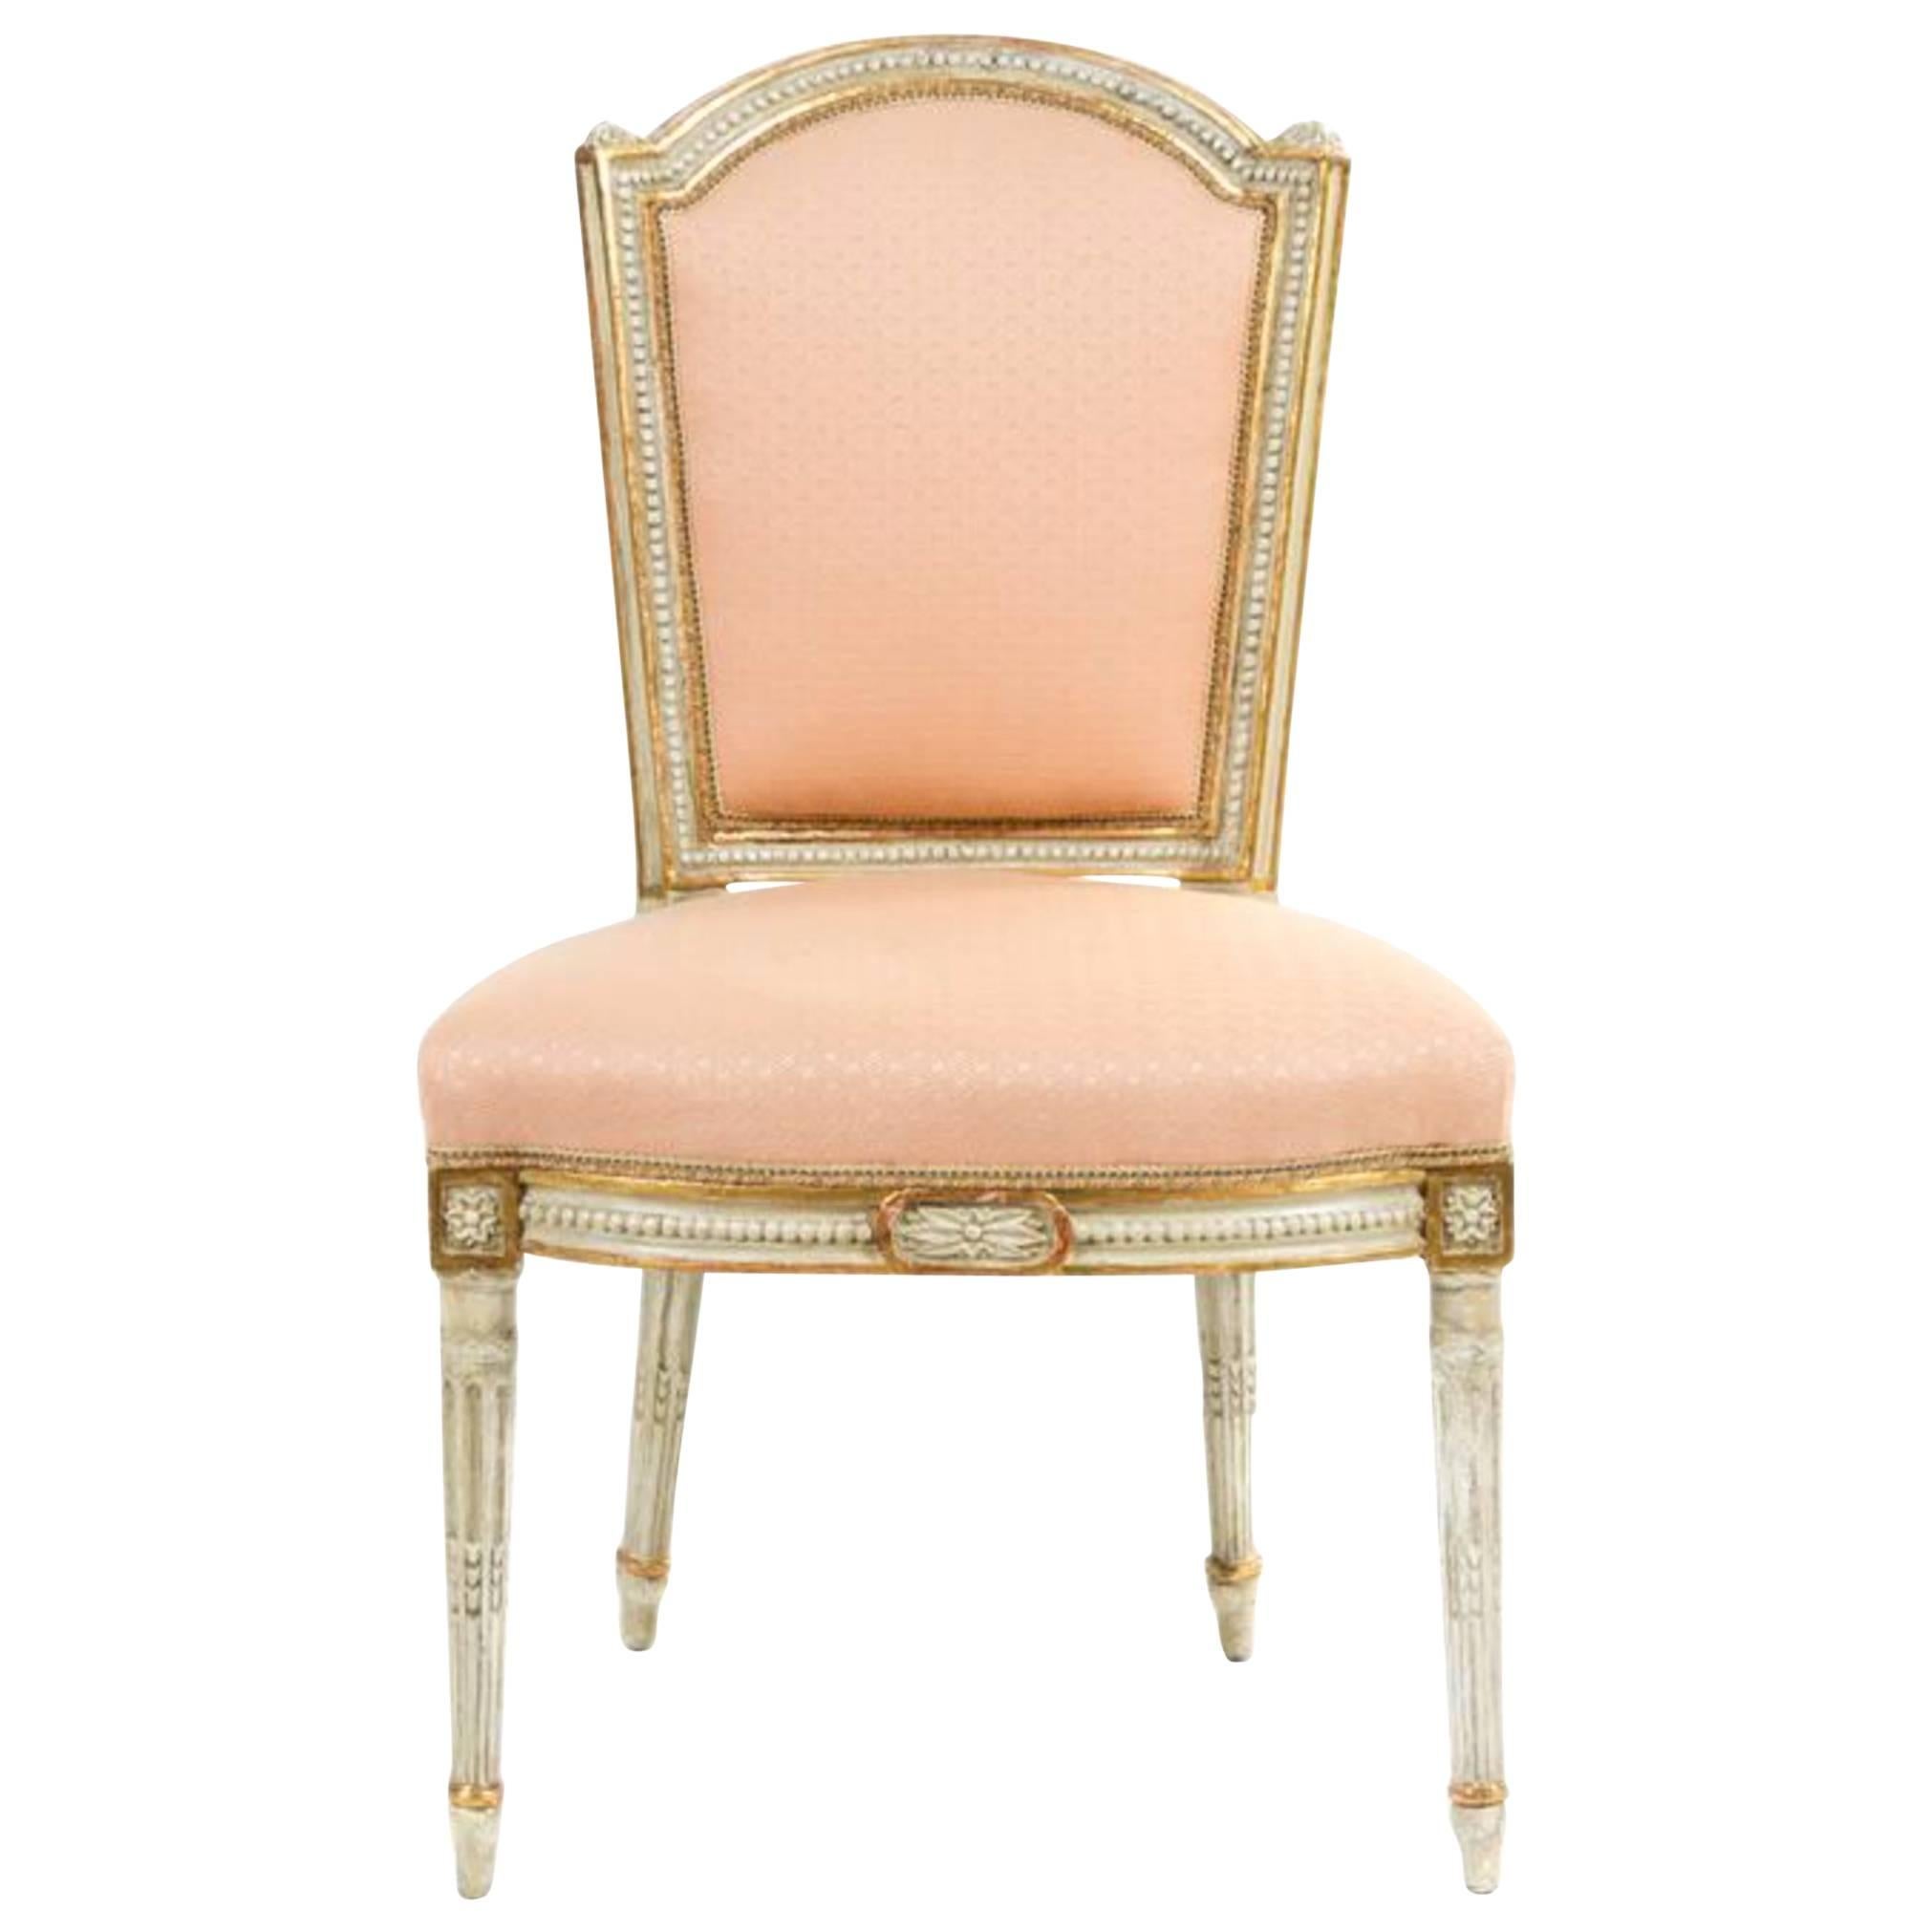 18th Century Louis XVI Side Chair with Painted and Gilt Finish